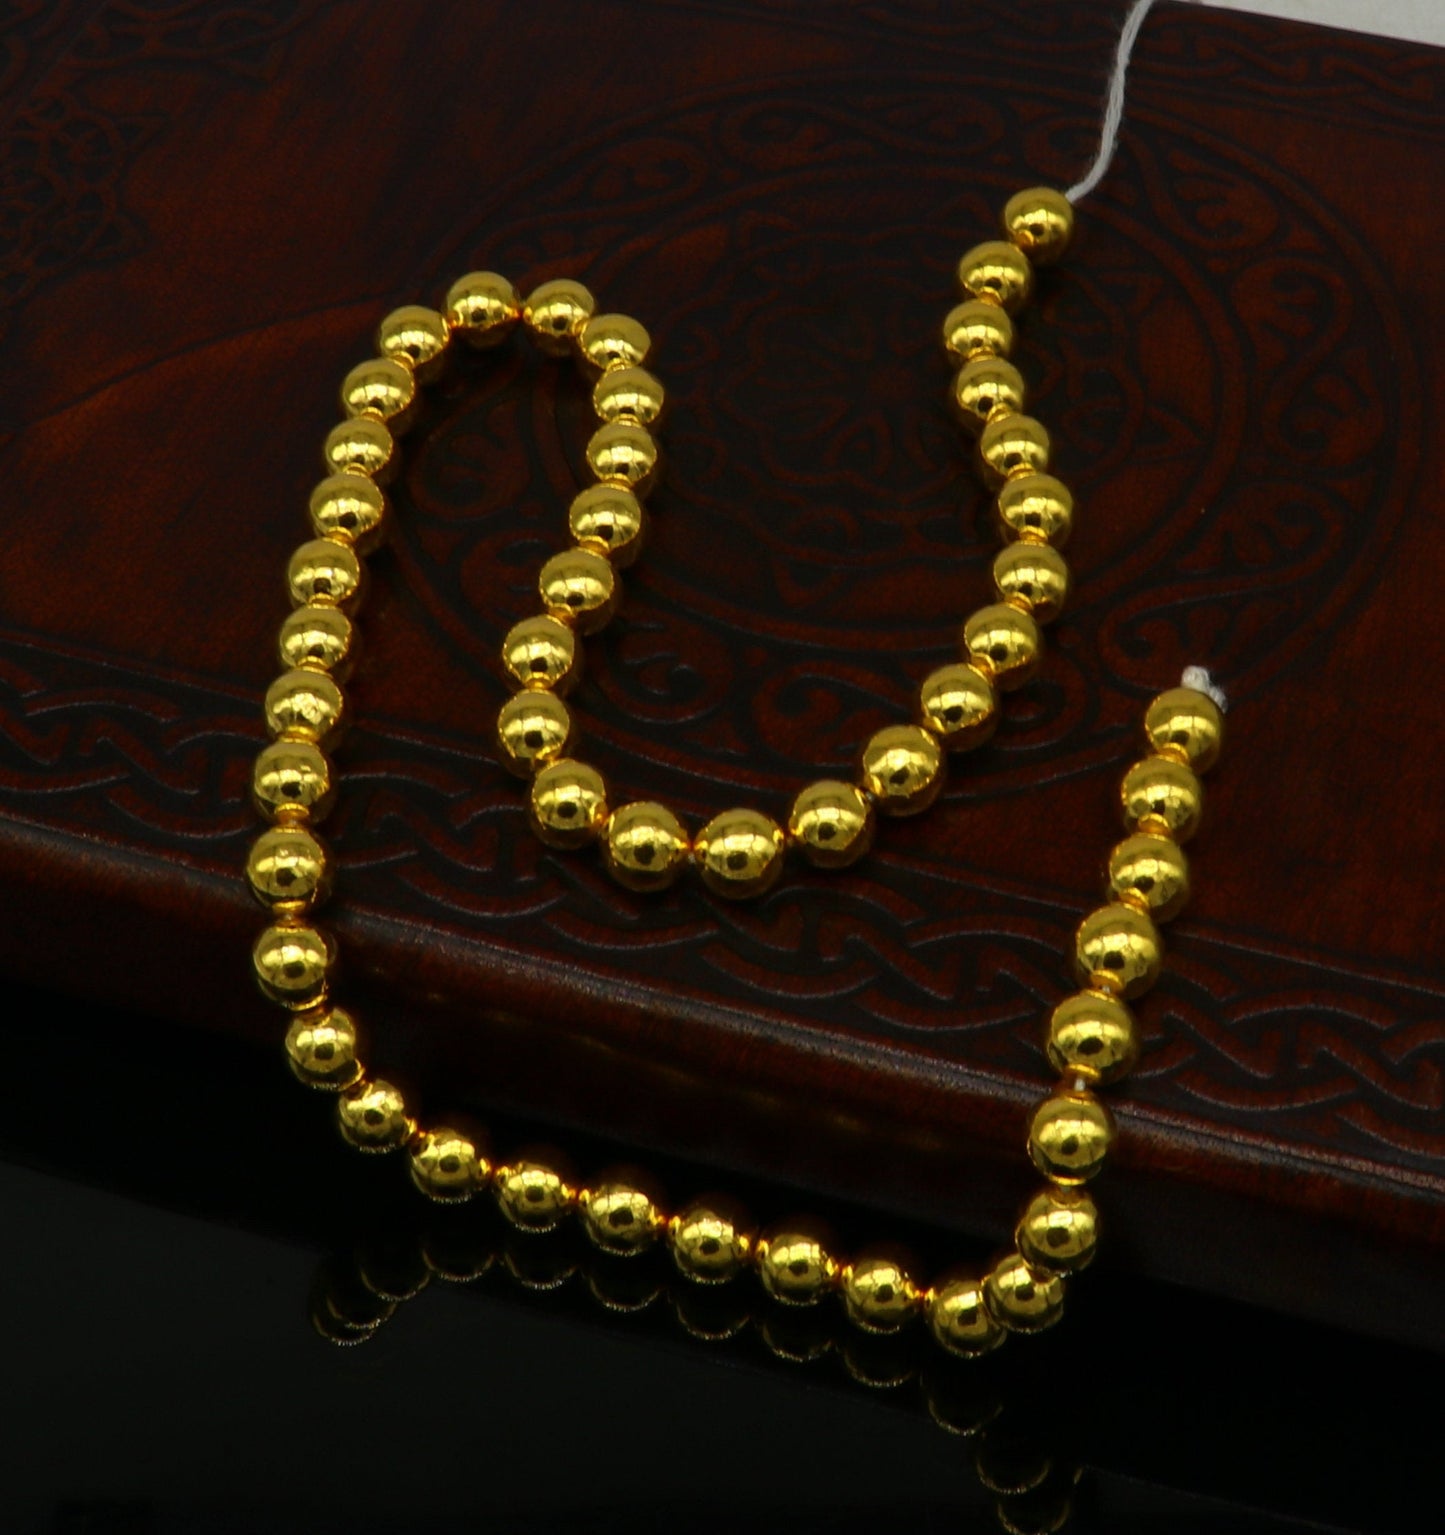 10 pieces 22kt yellow gold handmade 7 mm beads, loose beads, jewelry findings for customize jewelry, excellent wax beads findings from india - TRIBAL ORNAMENTS